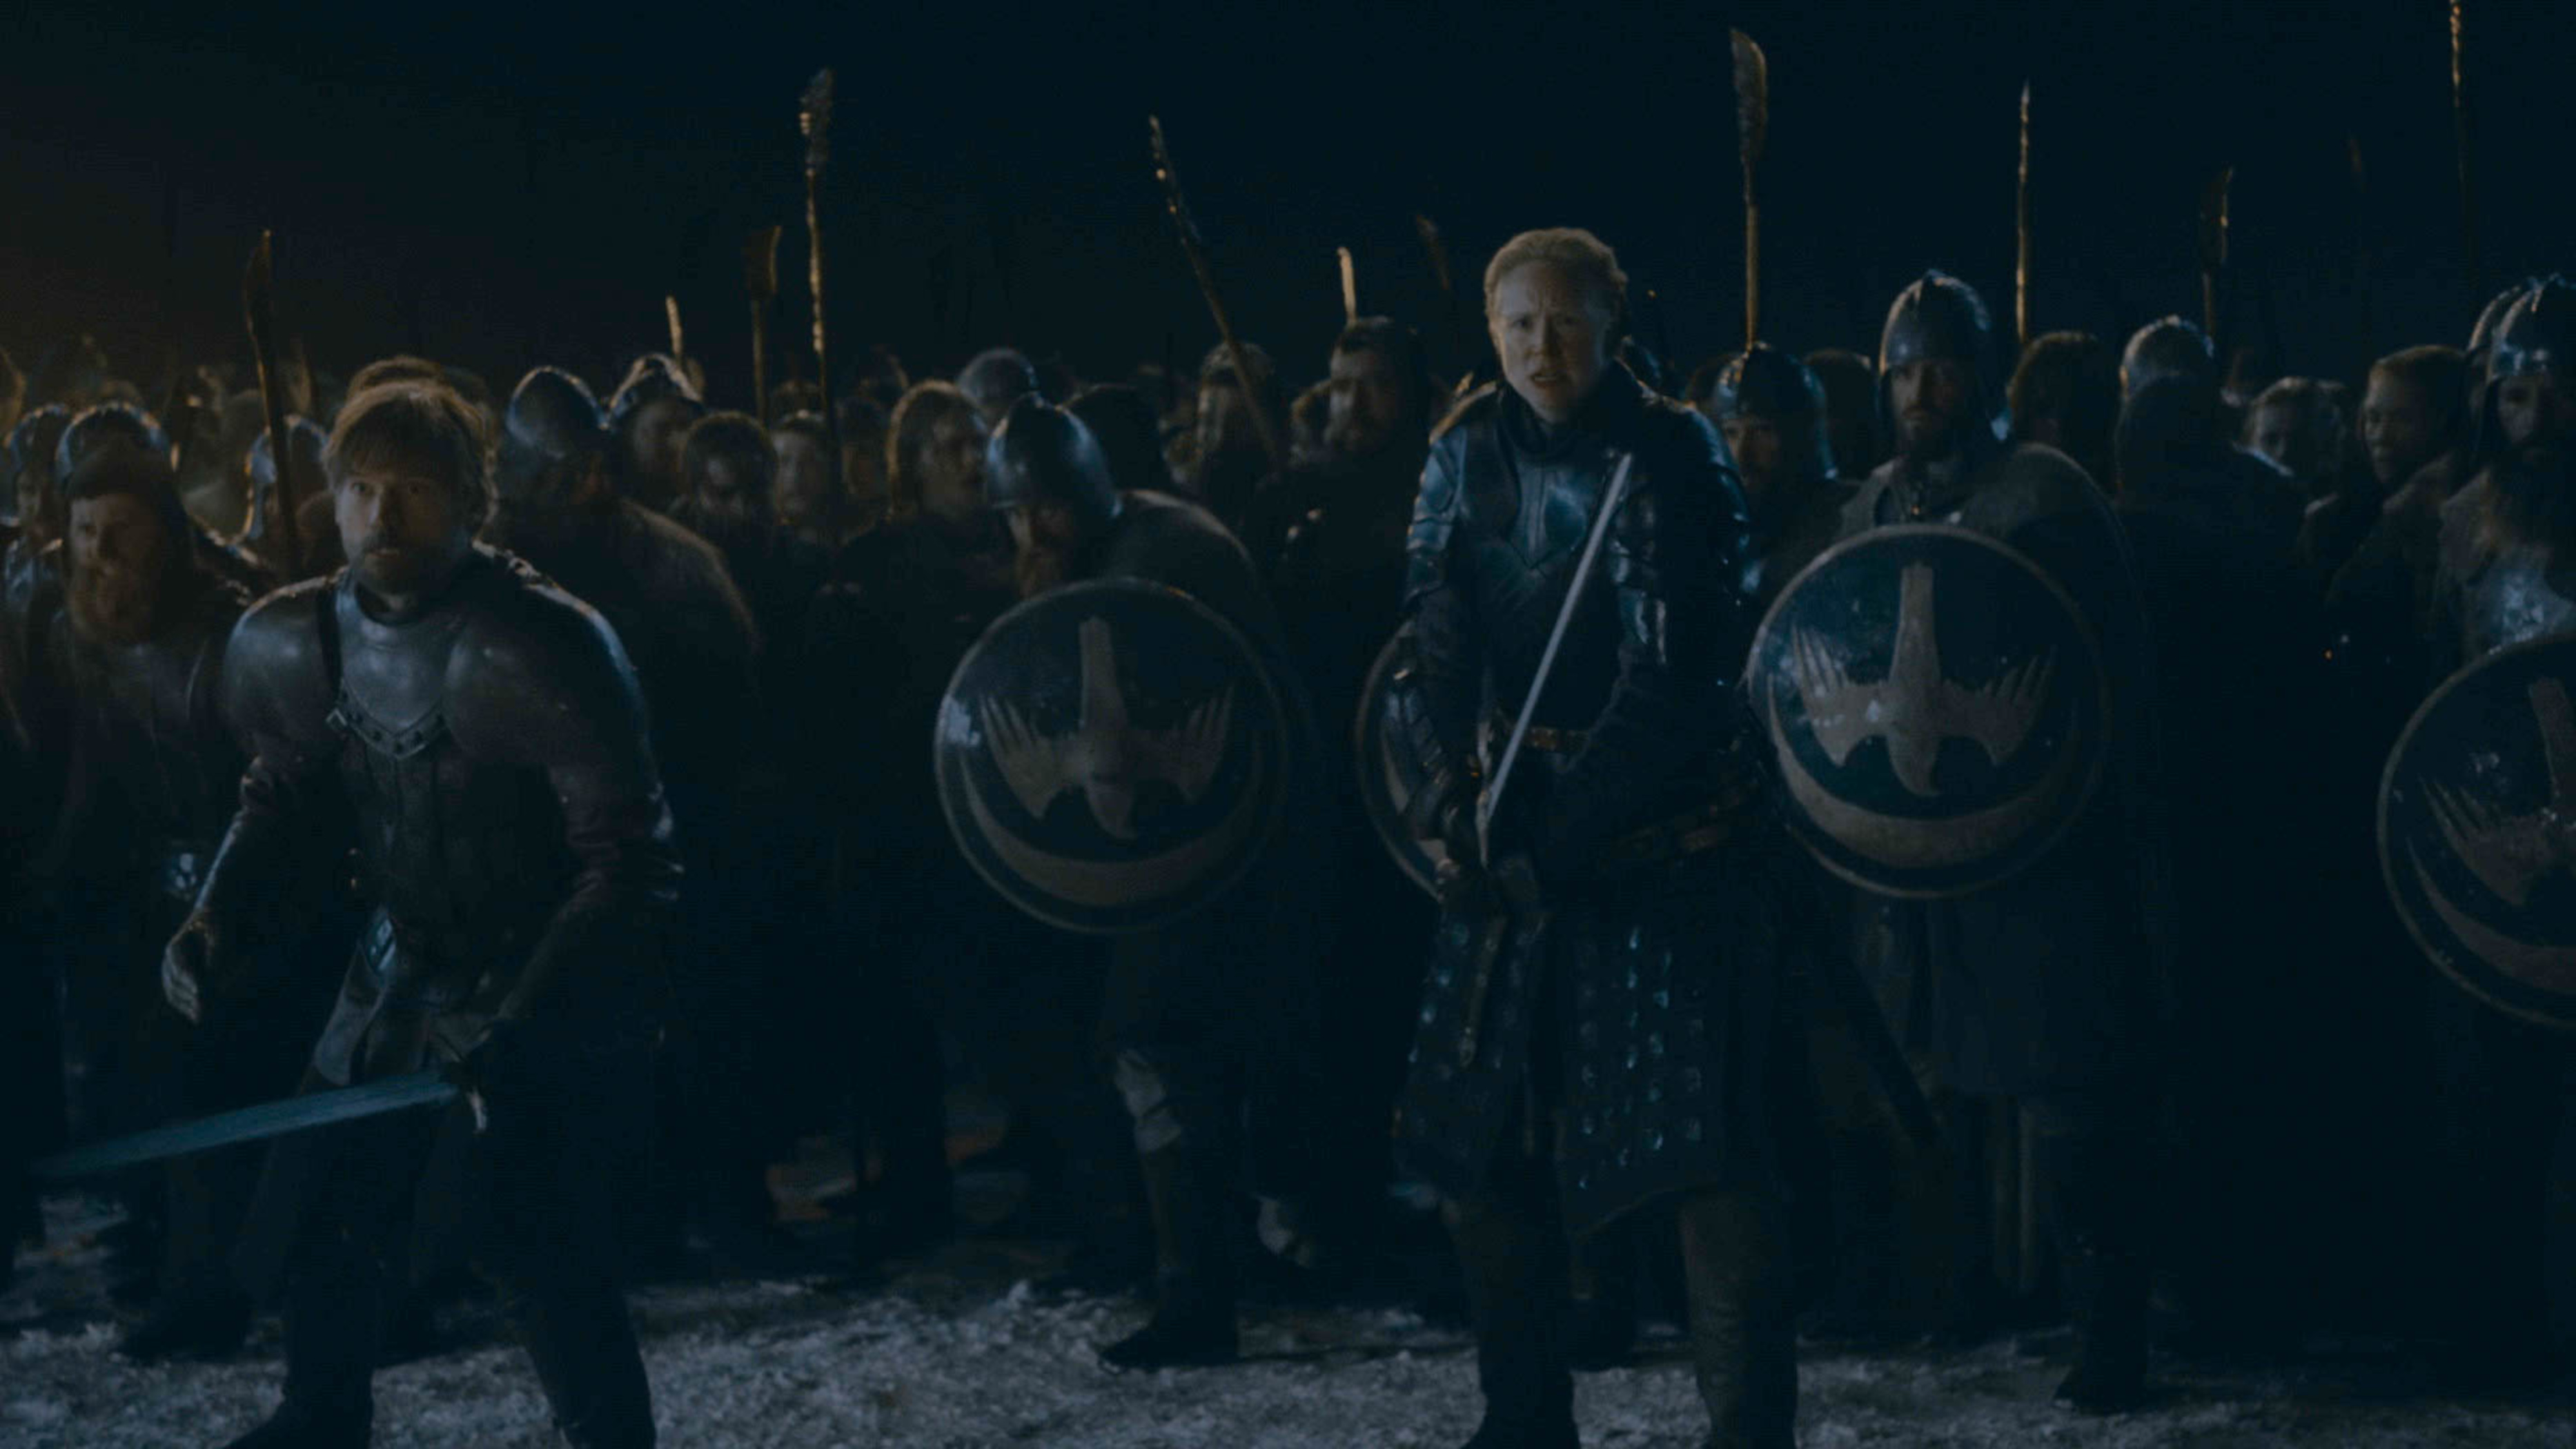 Nikolaj Coster-Waldau as Jaime Lannister and Gwendoline Christie as Brienne of Tarth on the frontlines at the Battle of Winterfell (HBO)